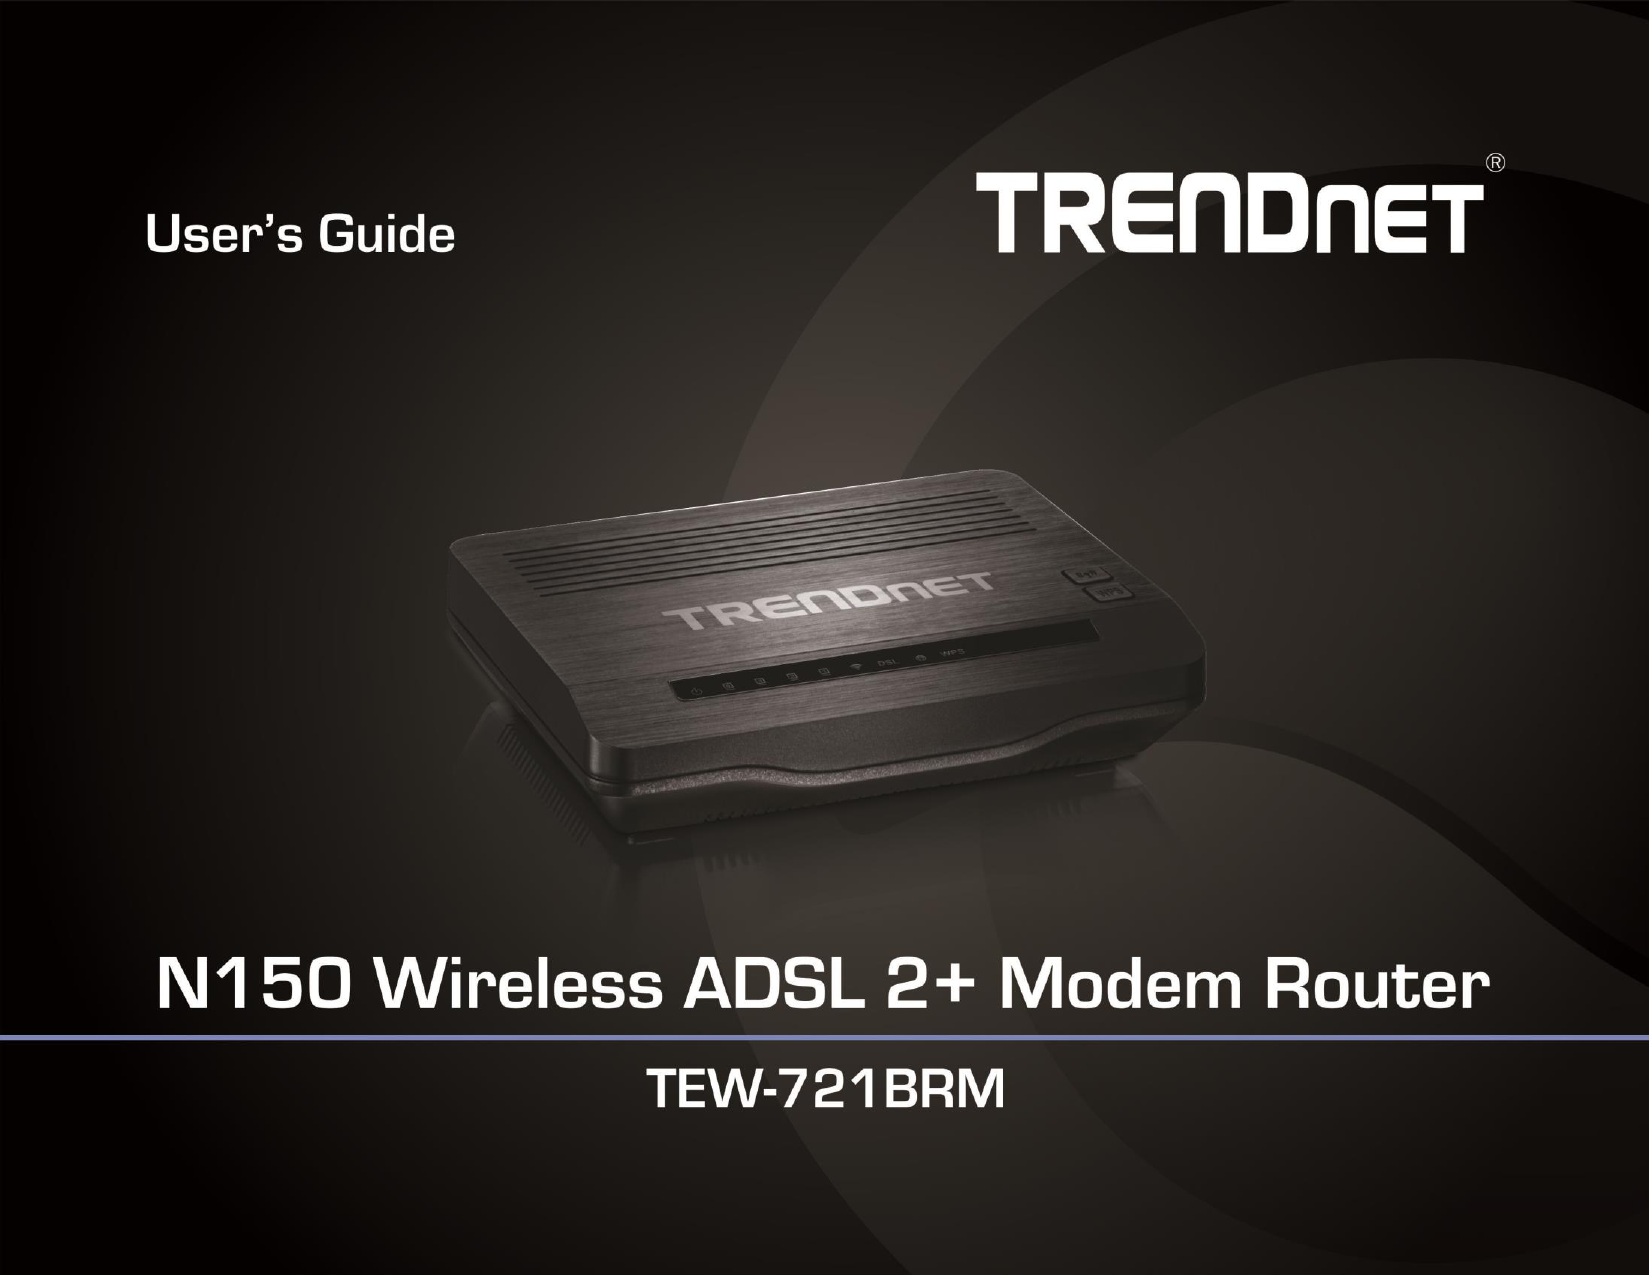             TRENDnet User’s Guide Cover Page 